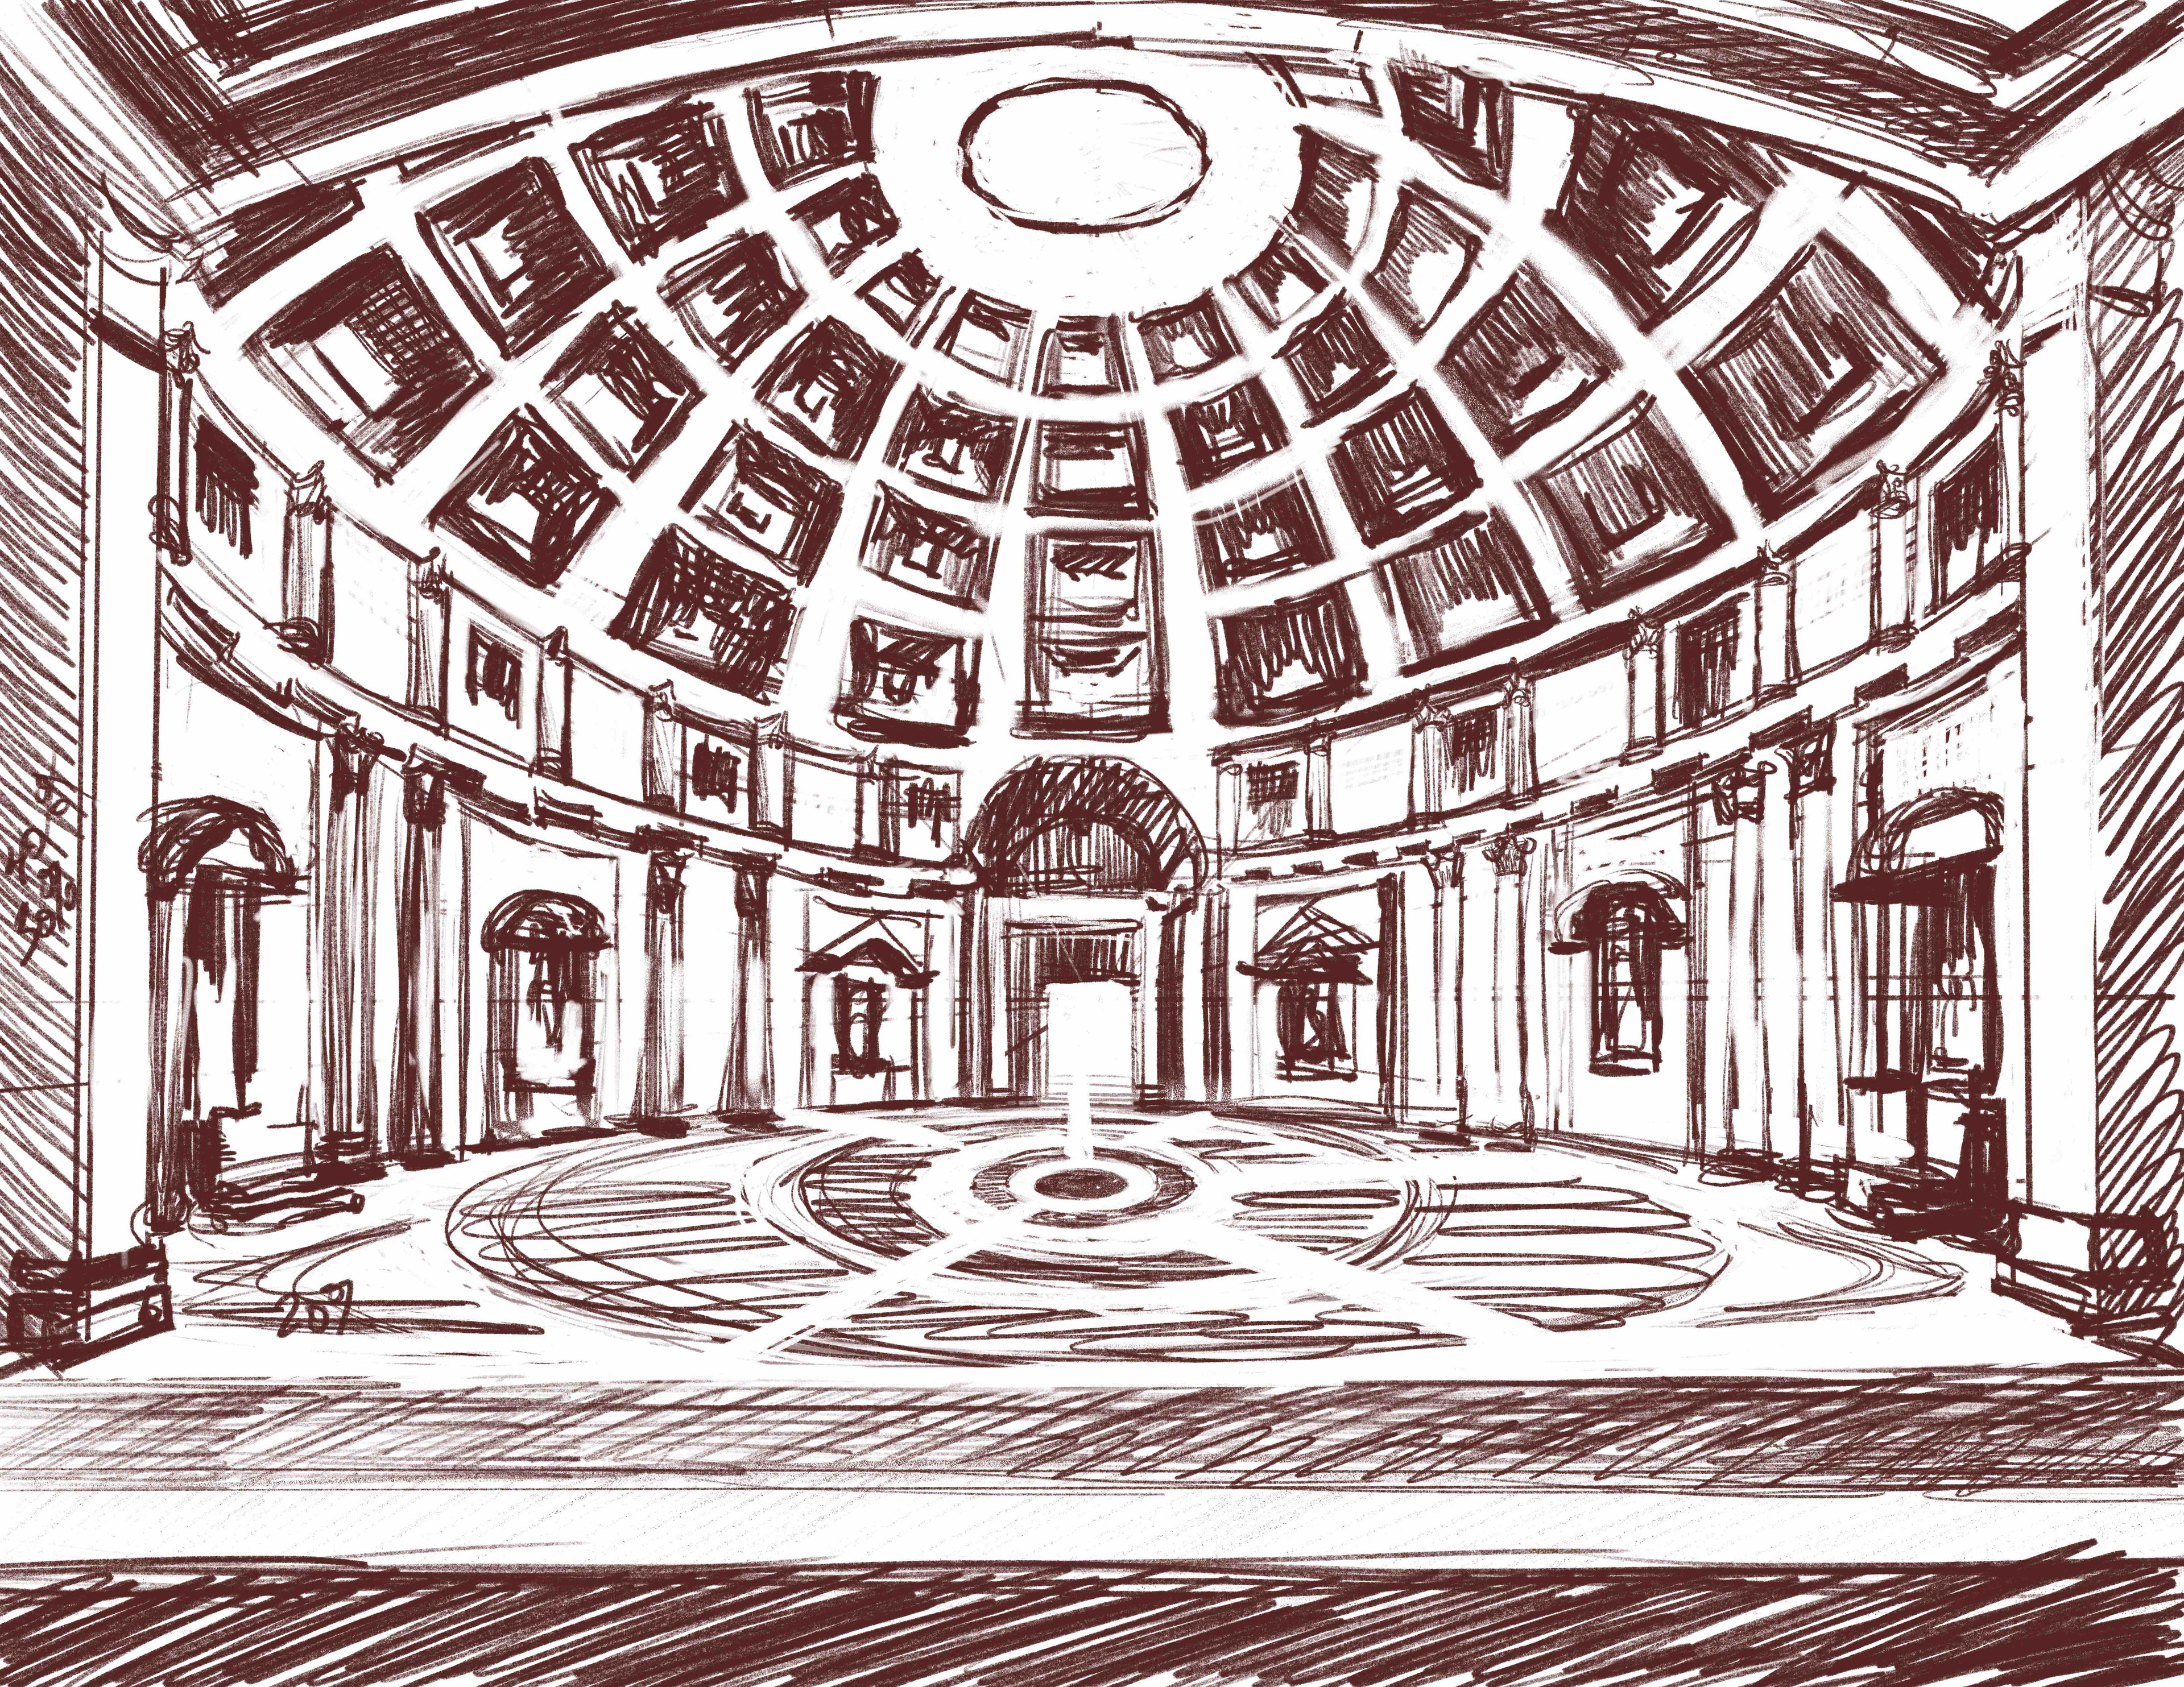 Light and Dark structure for the background drawing of the Italian architecture. Necessary for production.